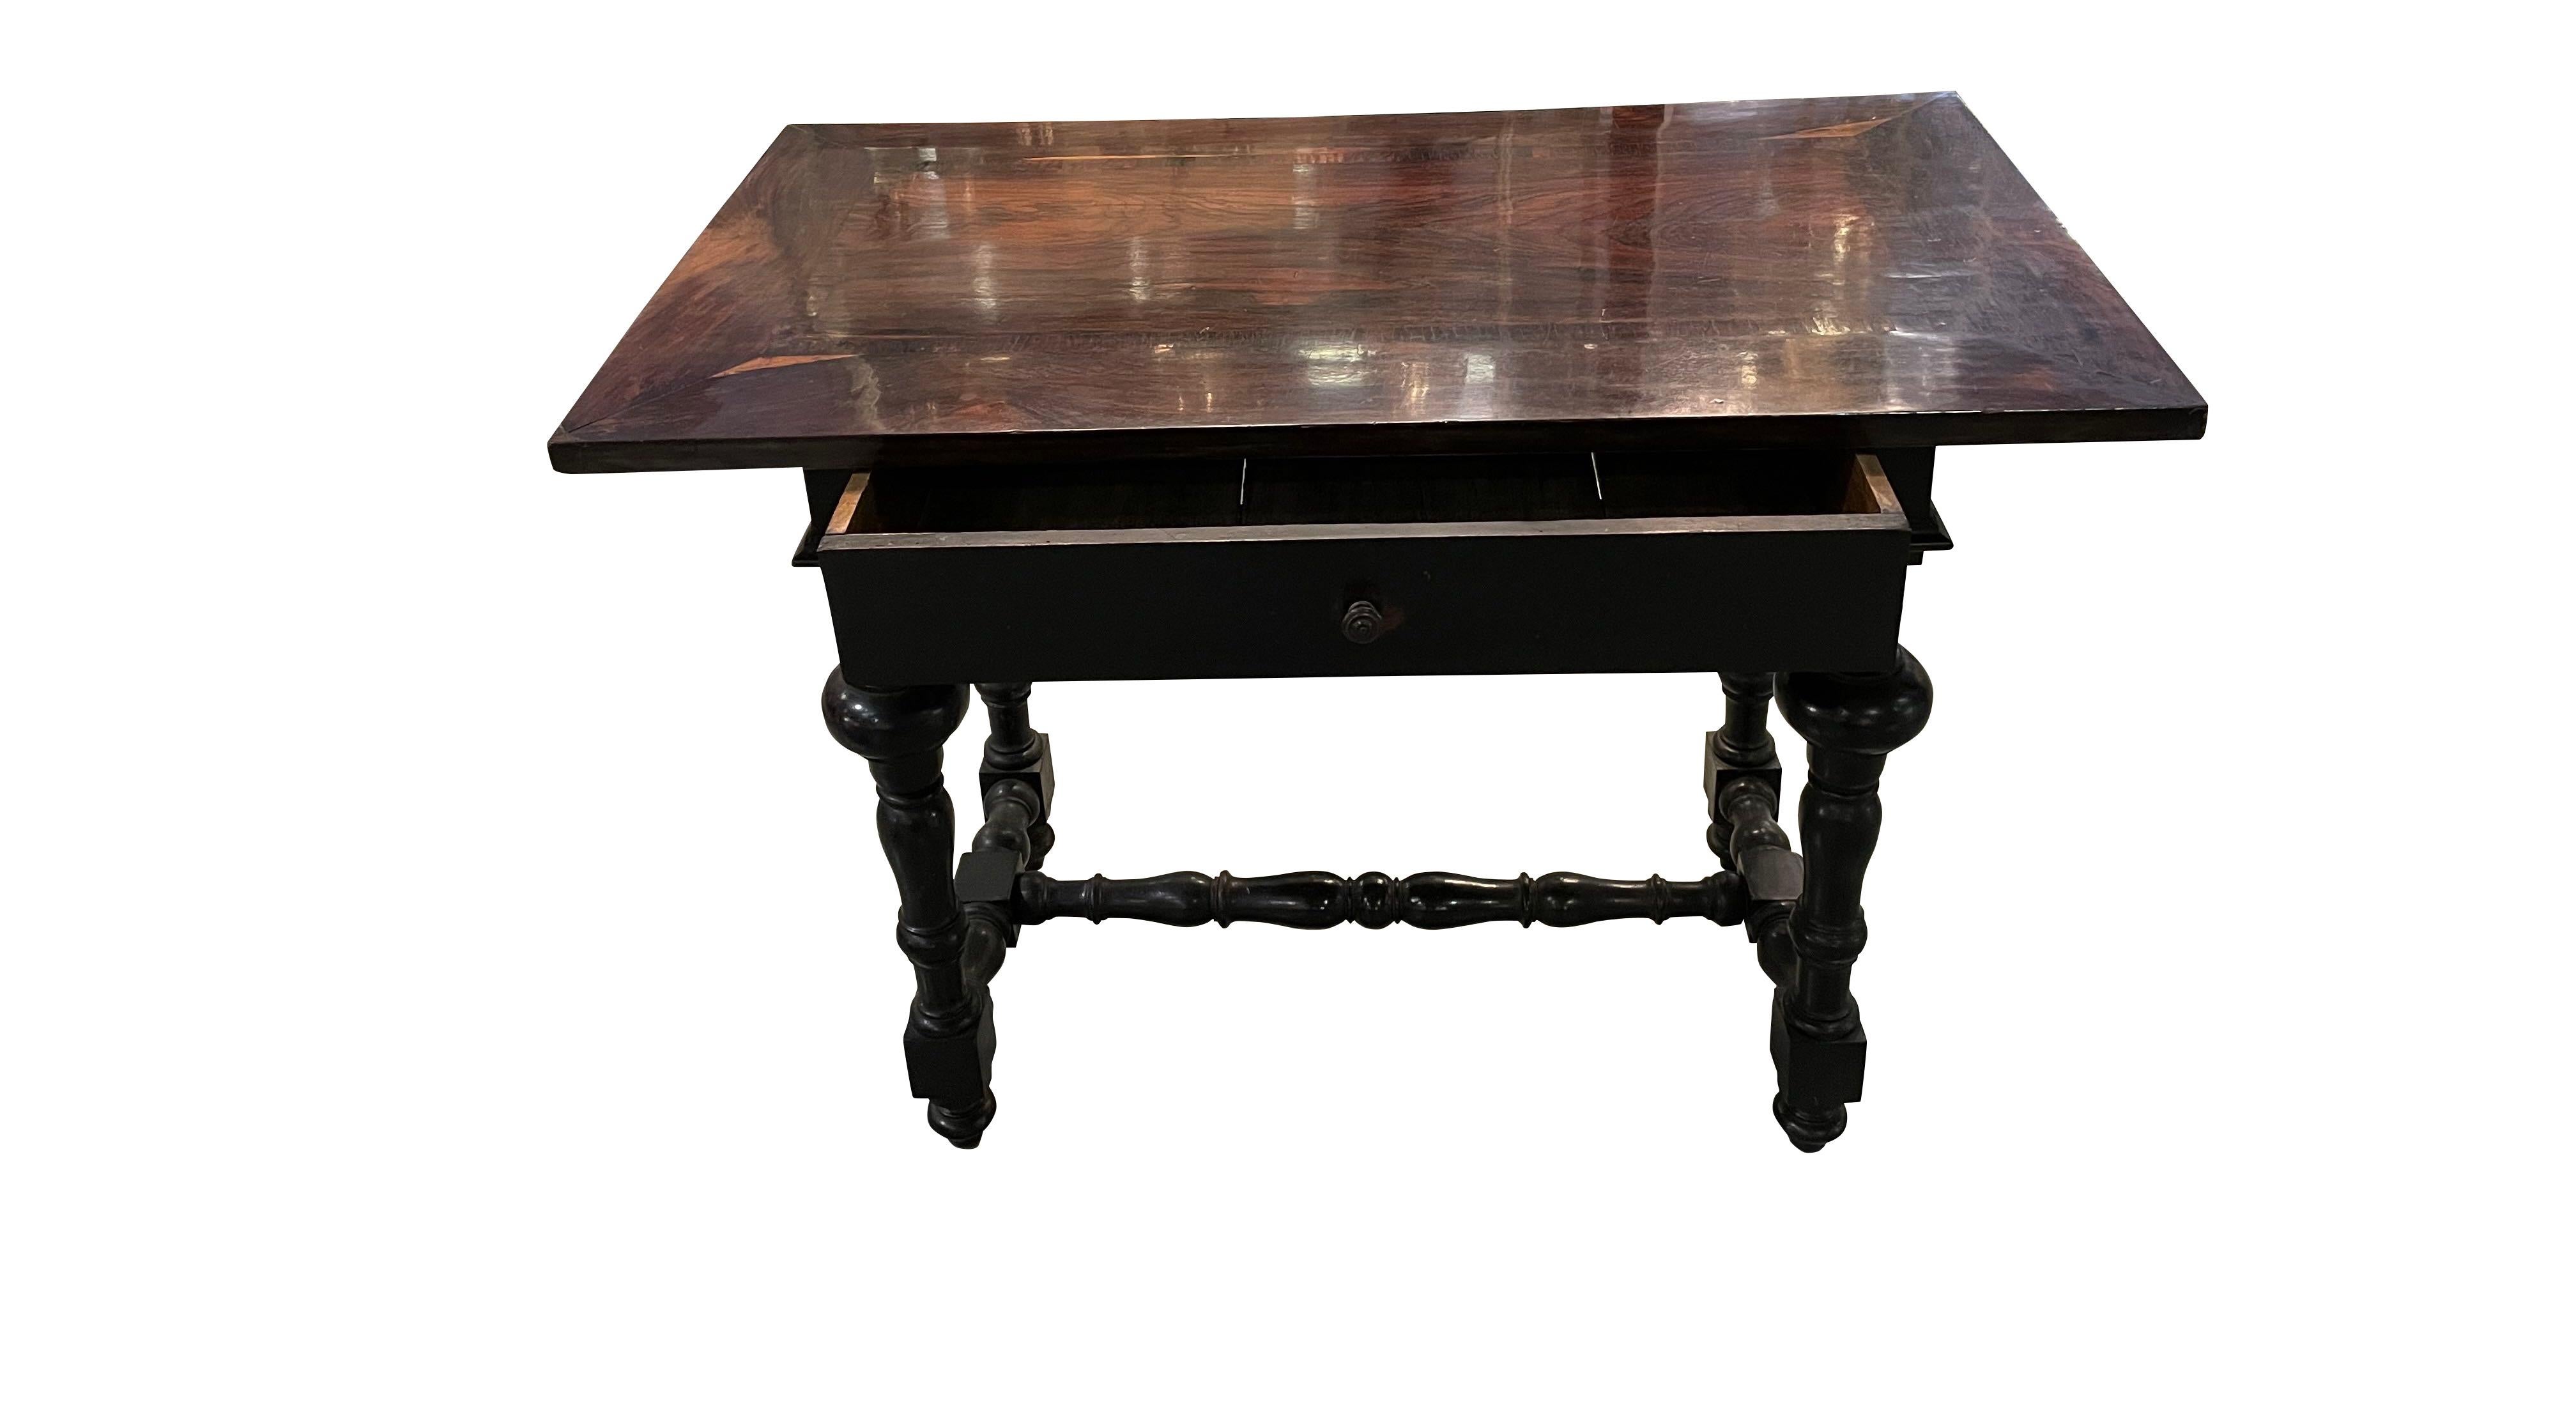 17th century Italian Florentine single drawer desk.
Decorative finial legs and stretcher.
Polished mahogany with a beautiful patina.
Can also be used as a side table
ARRIVING NOVEMBER.